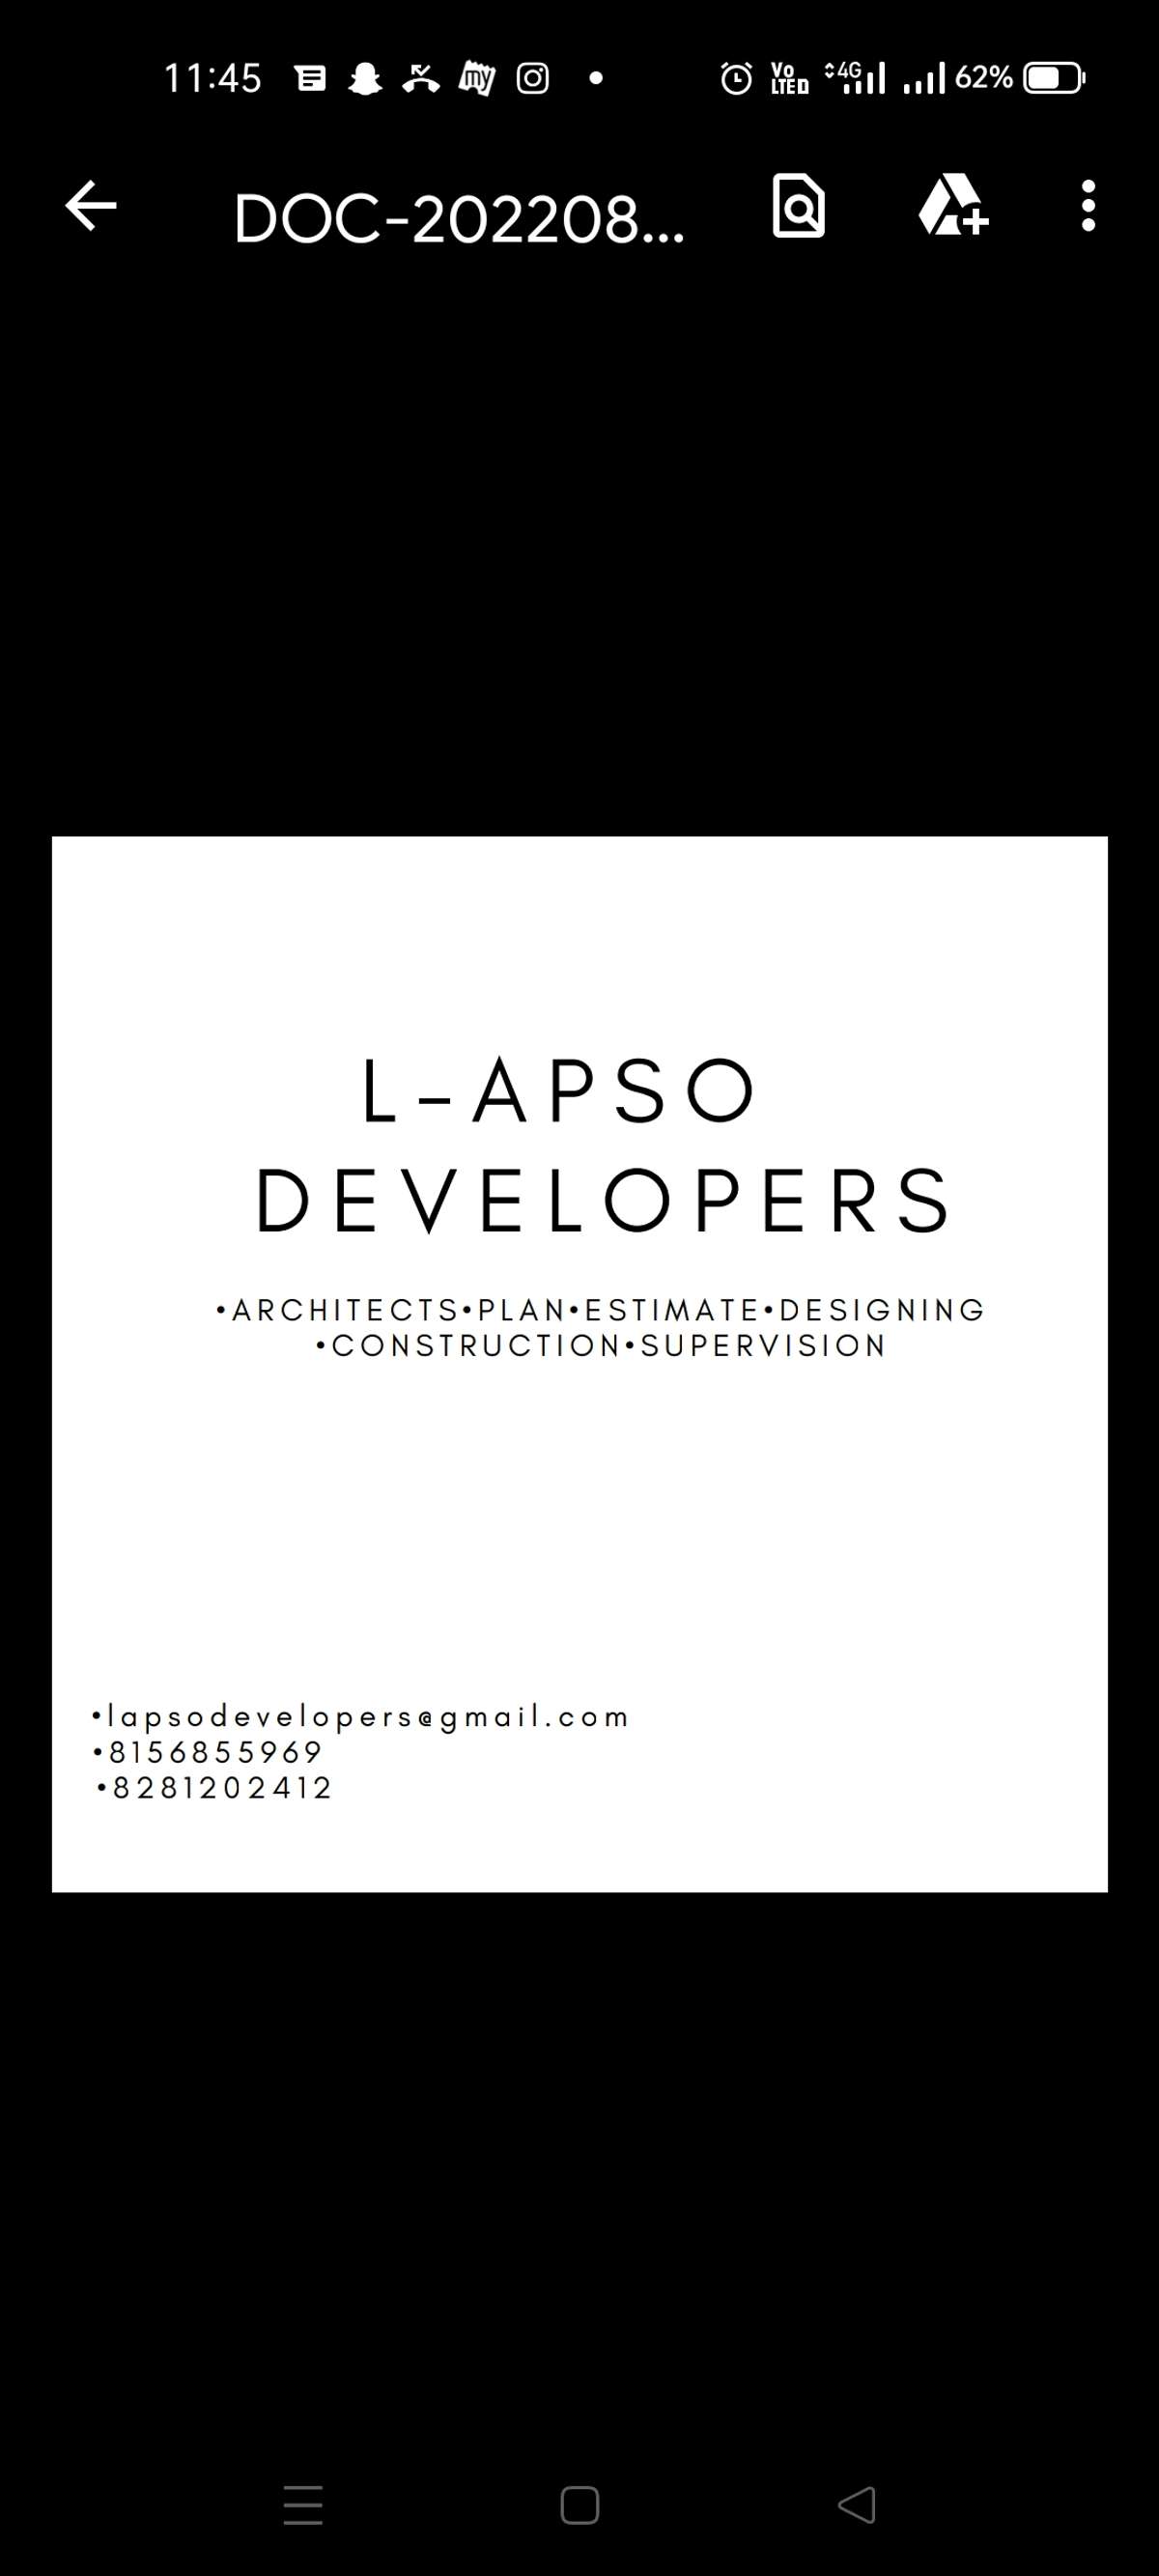 Designs by Civil Engineer L-APSO DEVELOPERS, Thrissur | Kolo